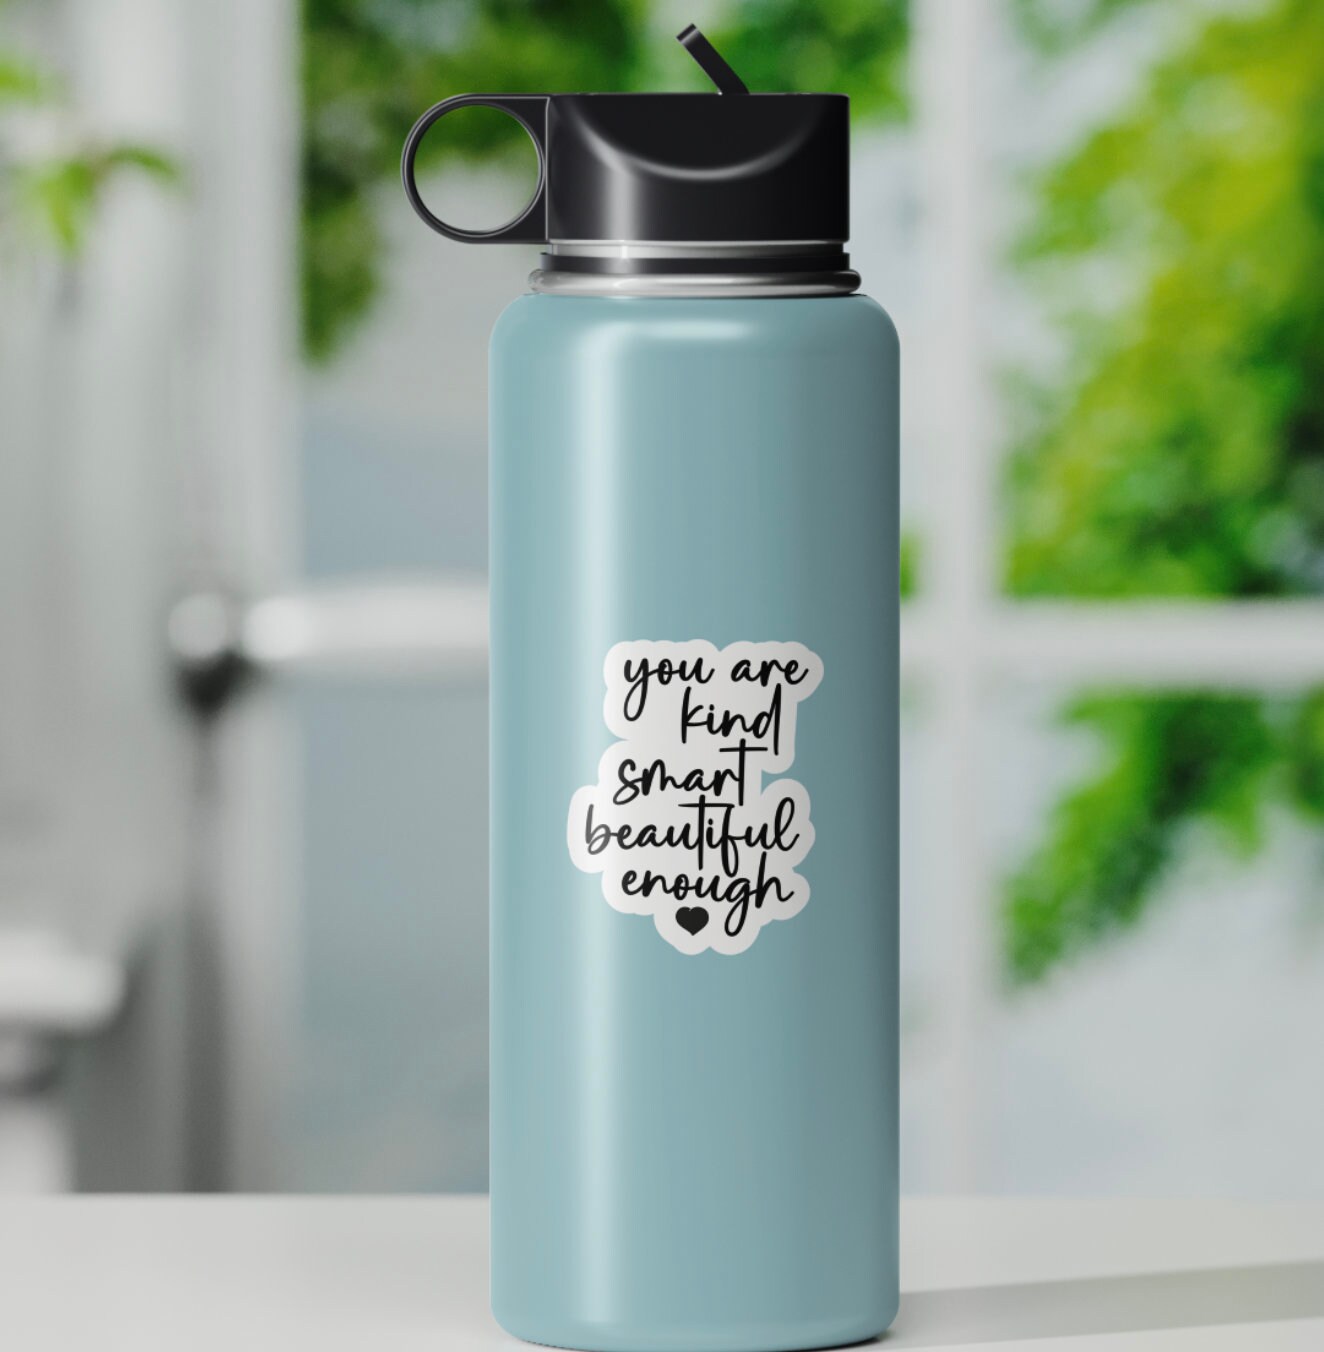 You are kind, smart, beautiful, enough Sticker vinyl laptop stickers affirmation stickers water bottle tumbler laptop decal computer